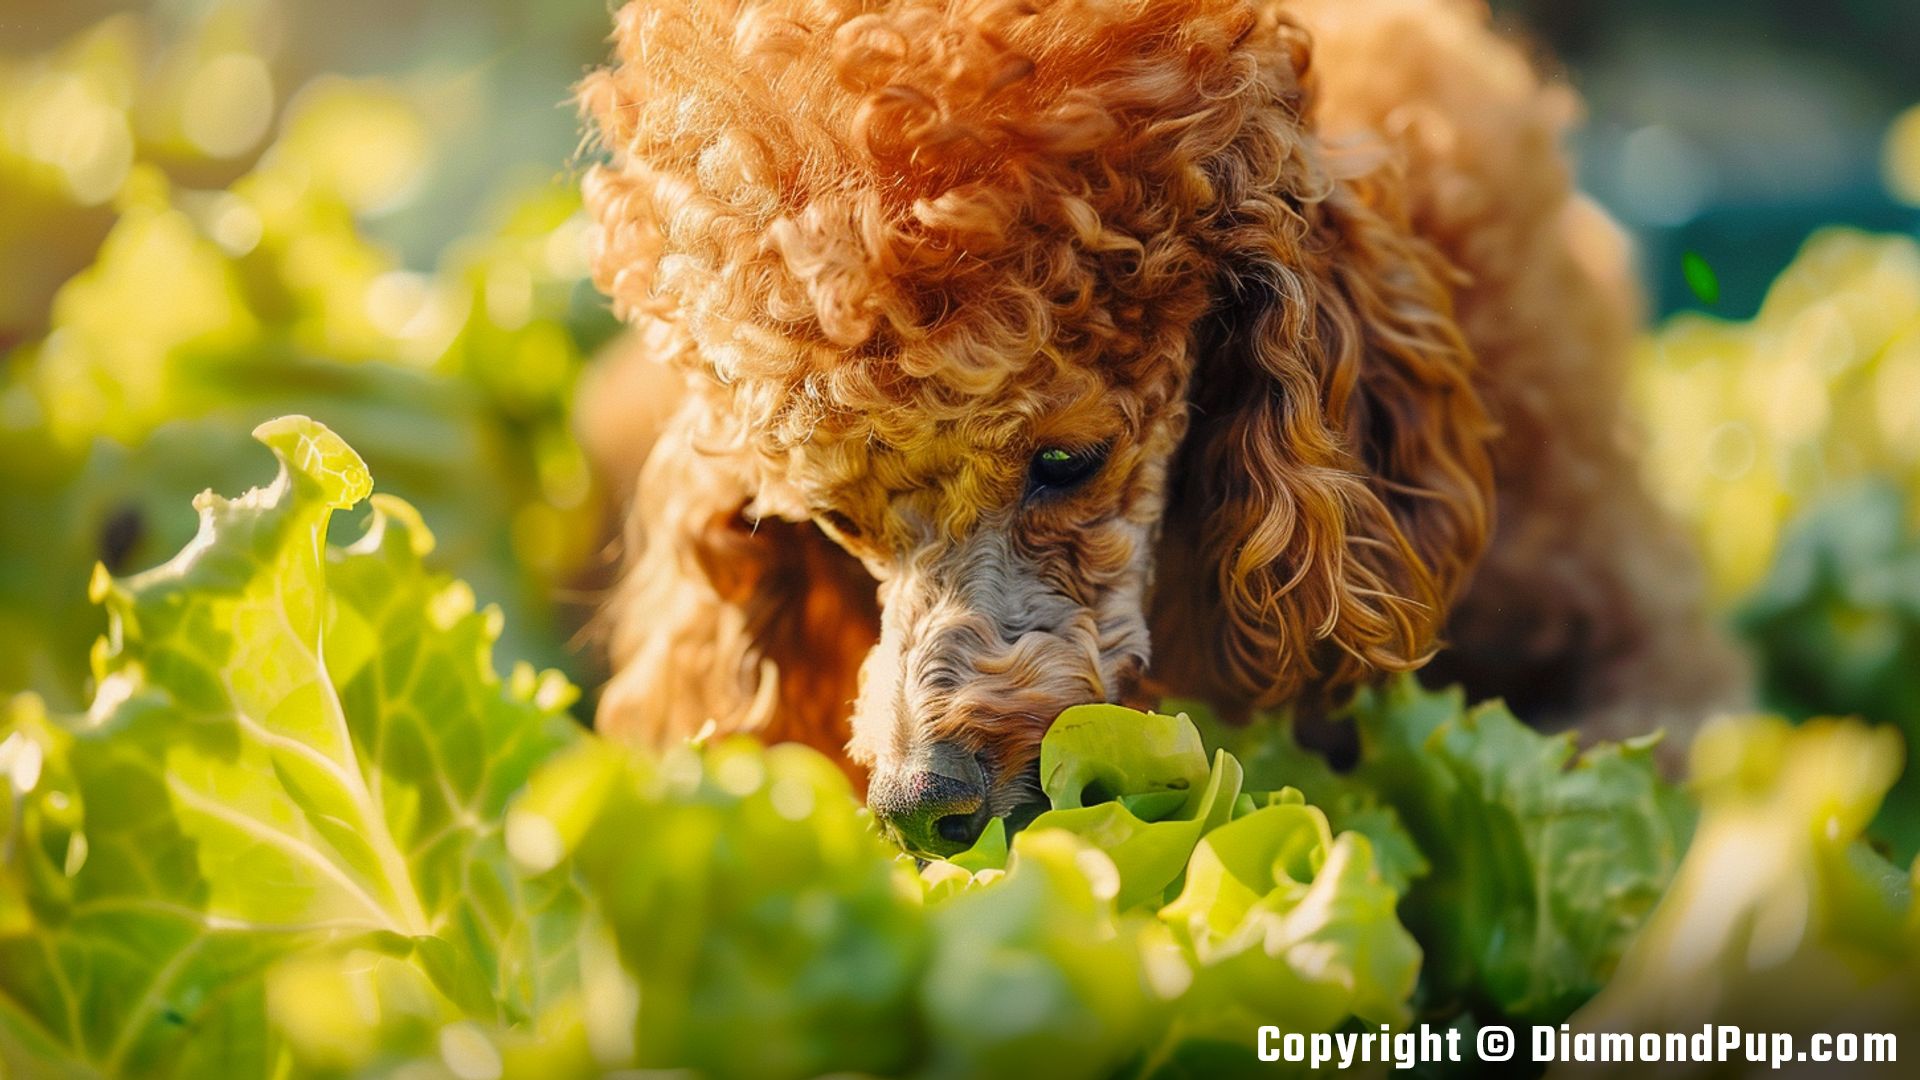 Photo of a Playful Poodle Eating Lettuce